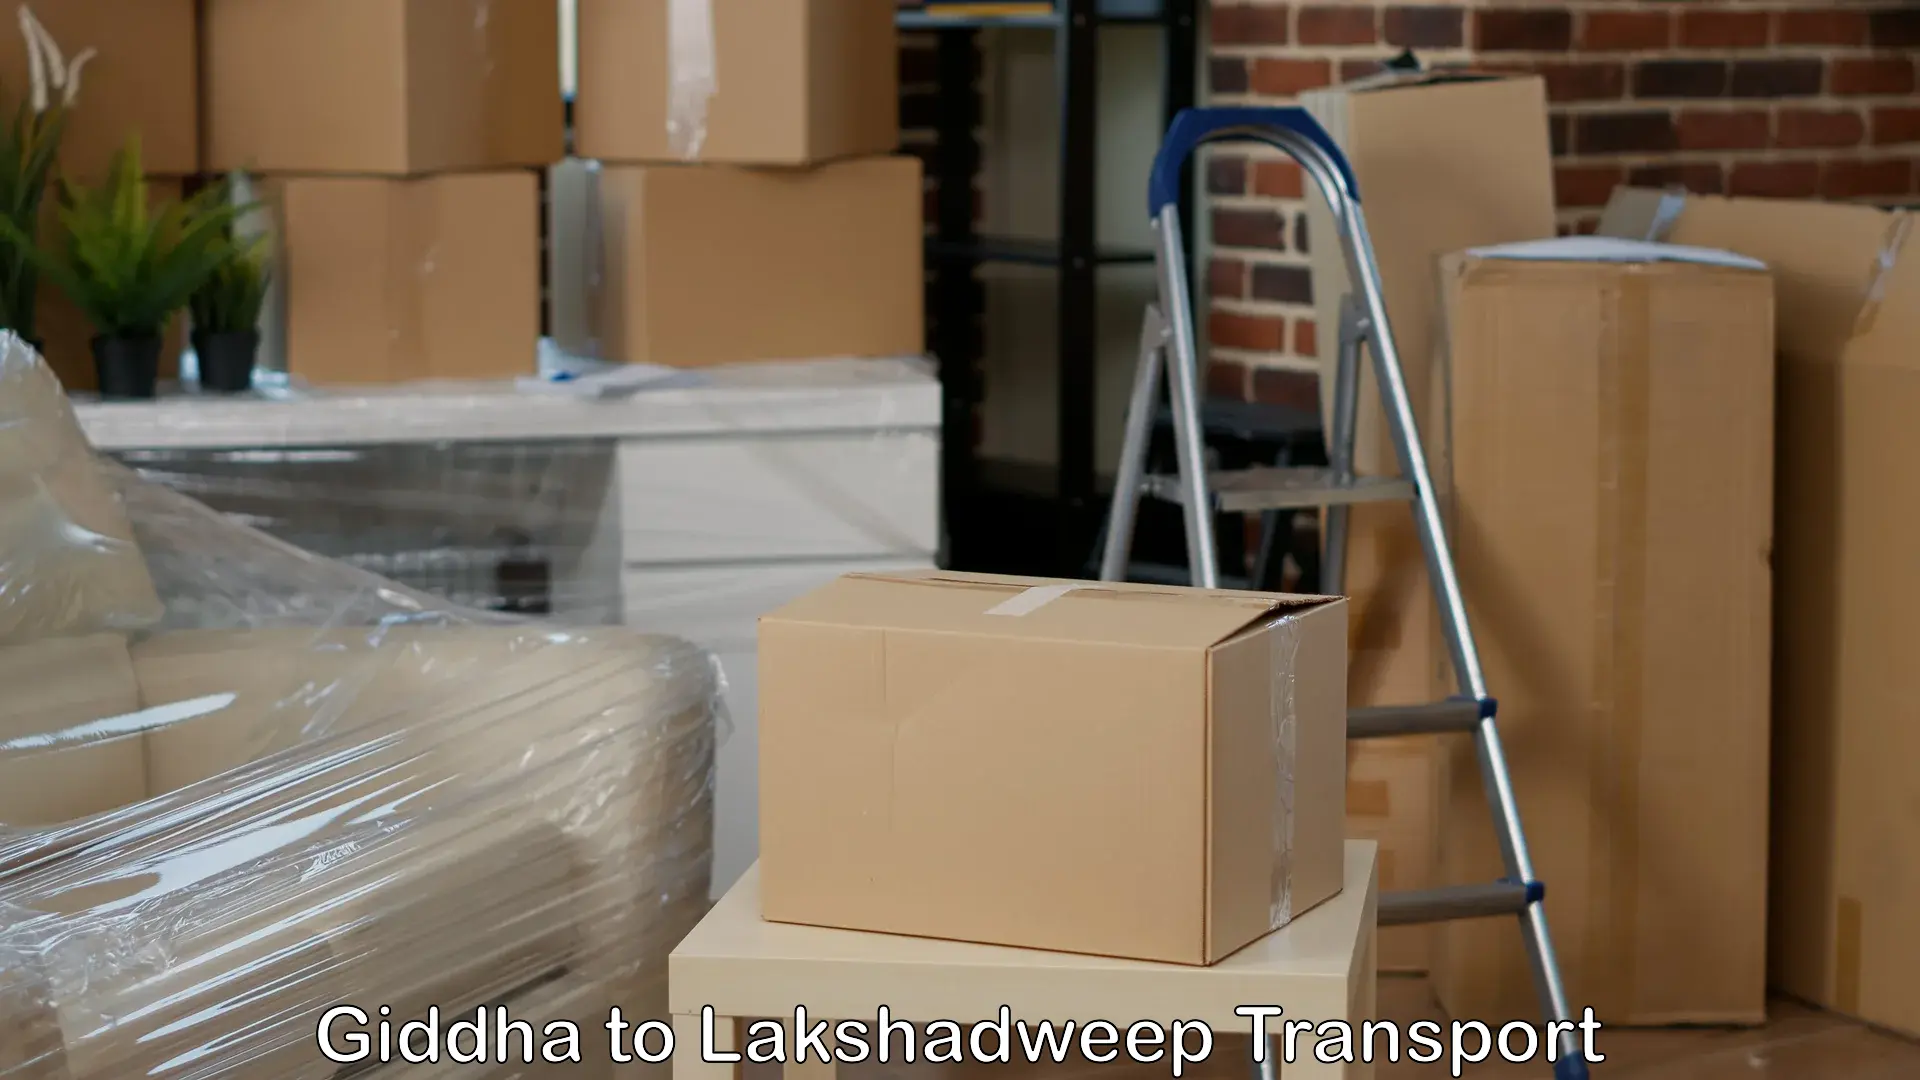 Parcel transport services Giddha to Lakshadweep